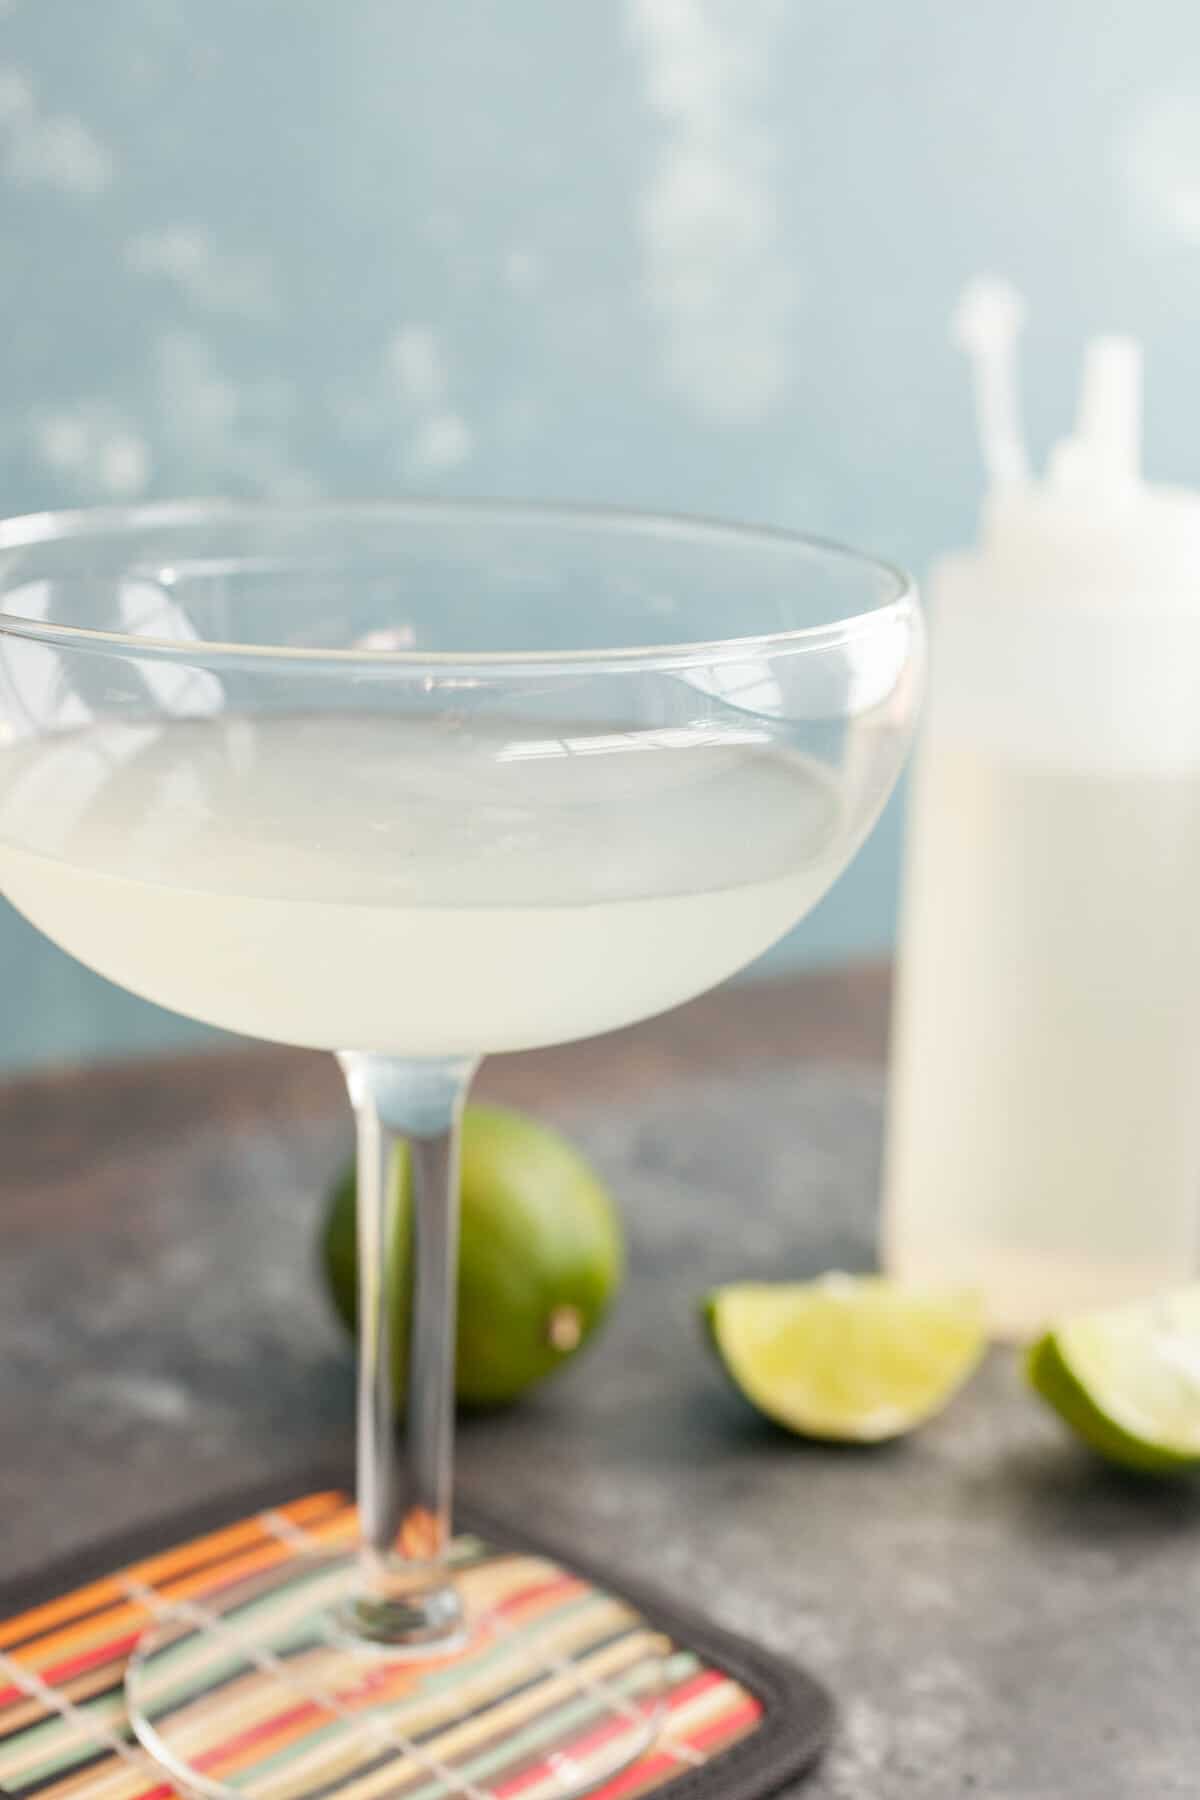 Classic Daiquiri Cocktail: Every time I see a Daiquiri mix, I shutter. All you need for this classic delicious cocktail is a few things you probably already have. Make the real version and cheers to summer! | macheesmo.com